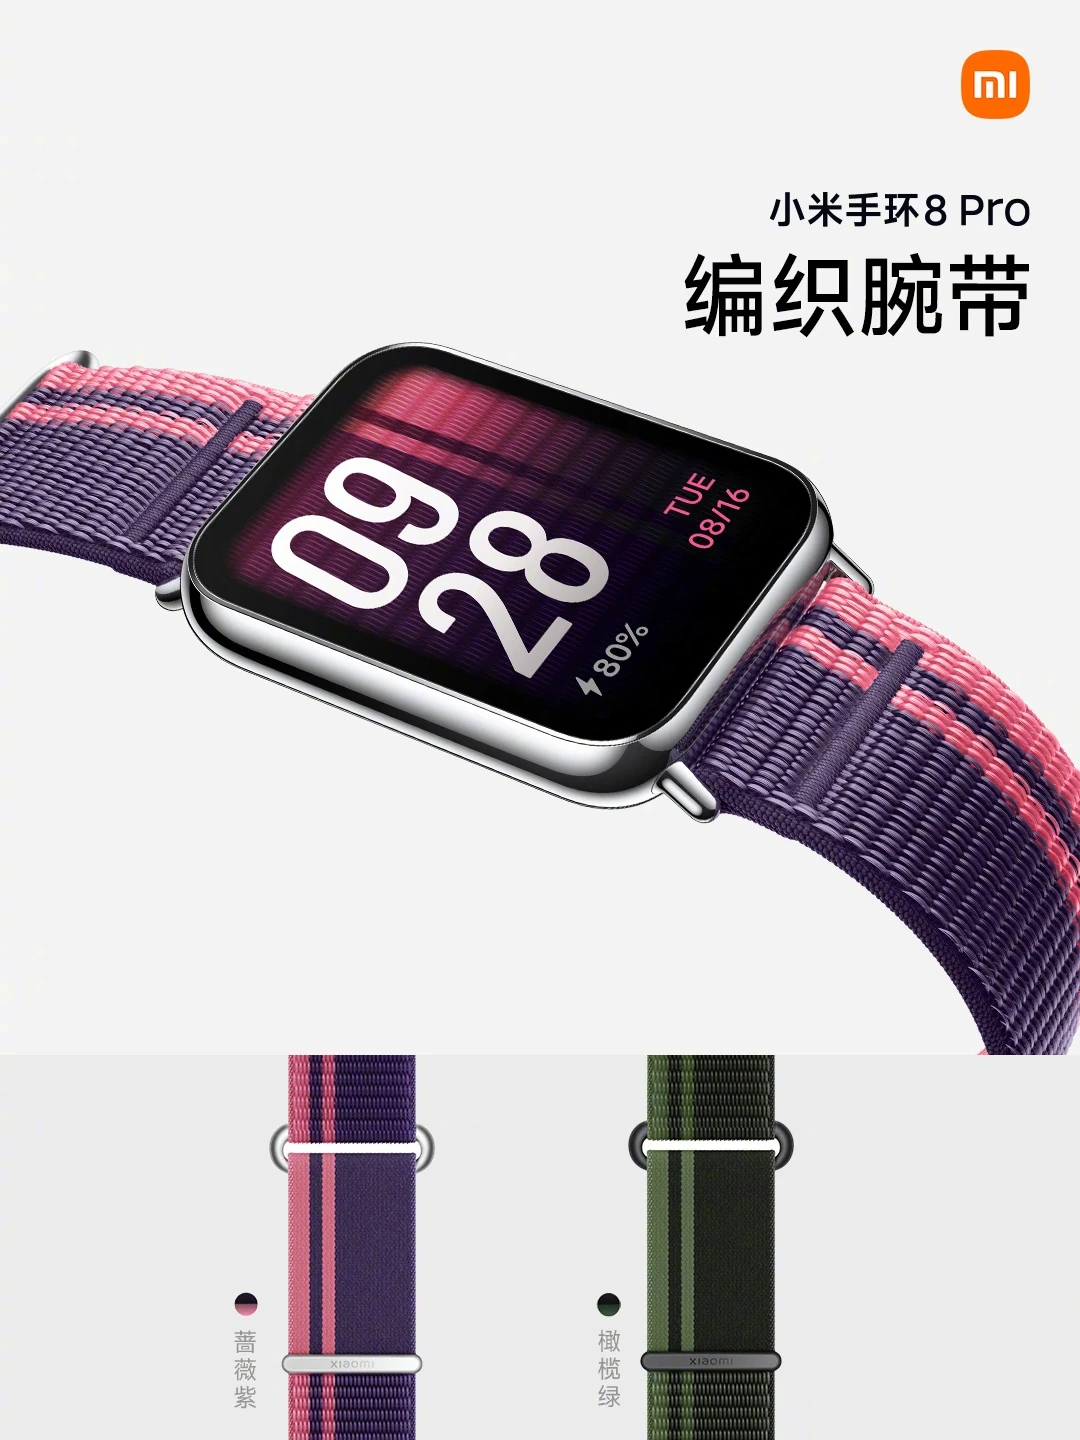 Xiaomi Band 8 Pro with 1.74″ AMOLED display, 150+ sport modes, GPS